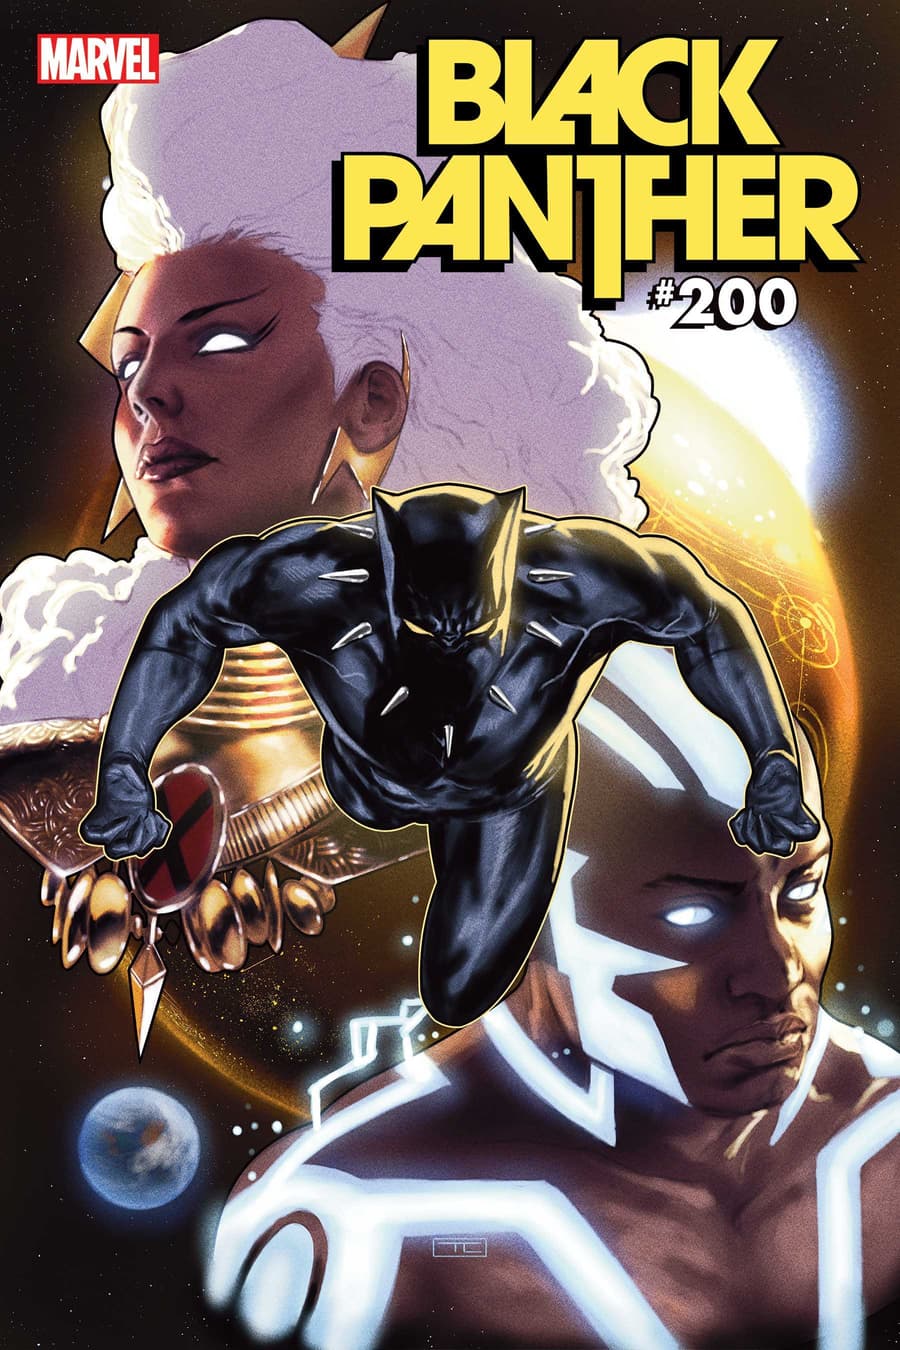 BLACK PANTHER #3 variant cover by Taurin Clarke